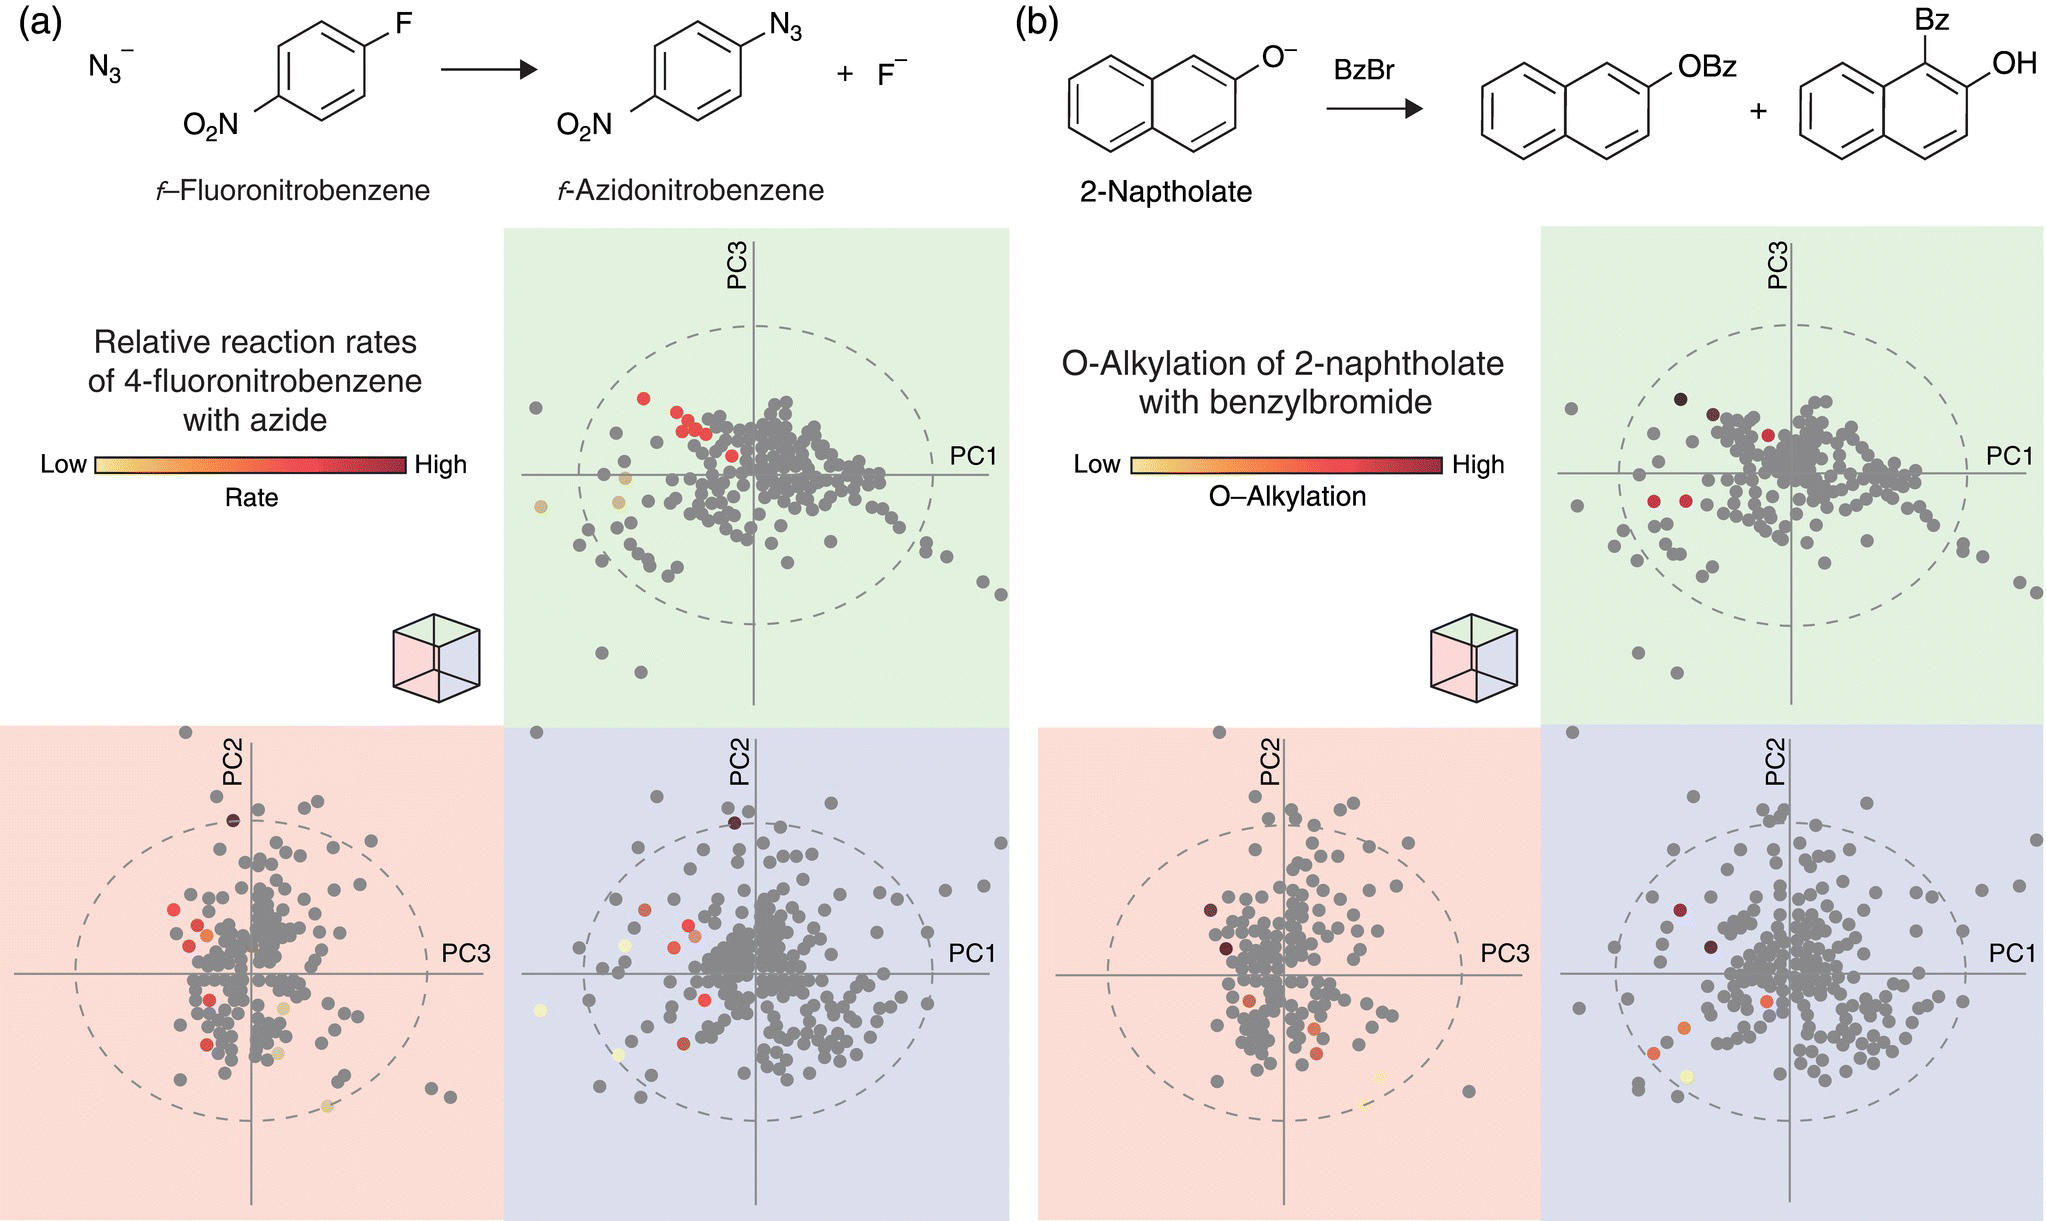 2 Sets of 3 score plots illustrating the relative reaction rates of 4-fluoronitrobenzene with azide (a) and the O-alkylation of 2-naphtholate with benzylbromide (b), with each set having a corresponding scheme at the top.